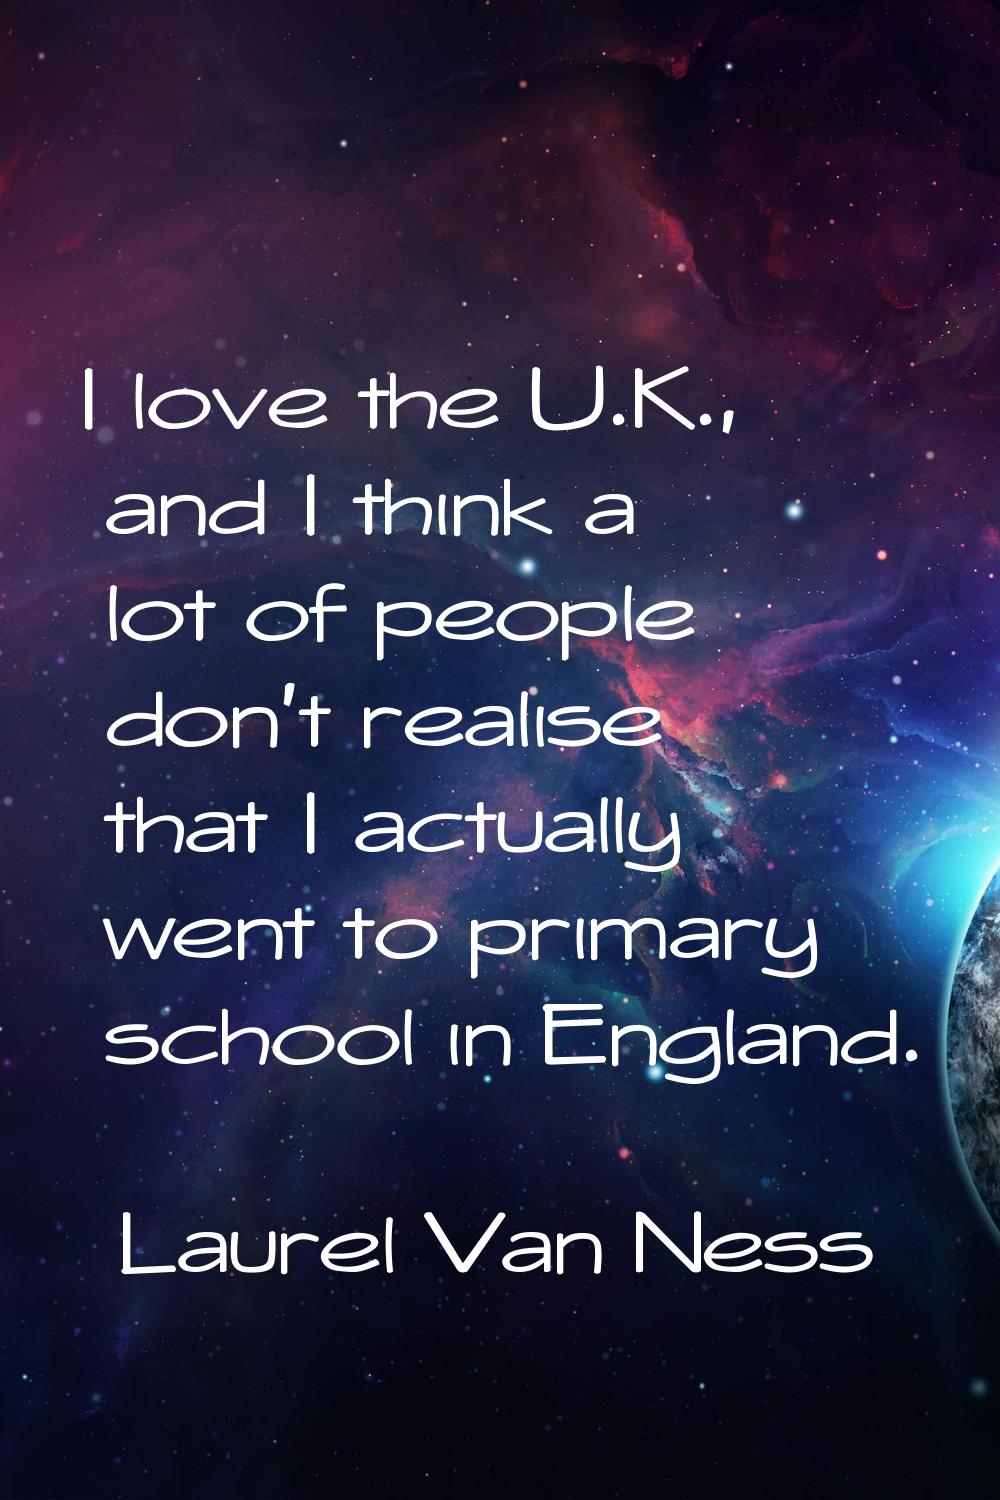 I love the U.K., and I think a lot of people don't realise that I actually went to primary school i